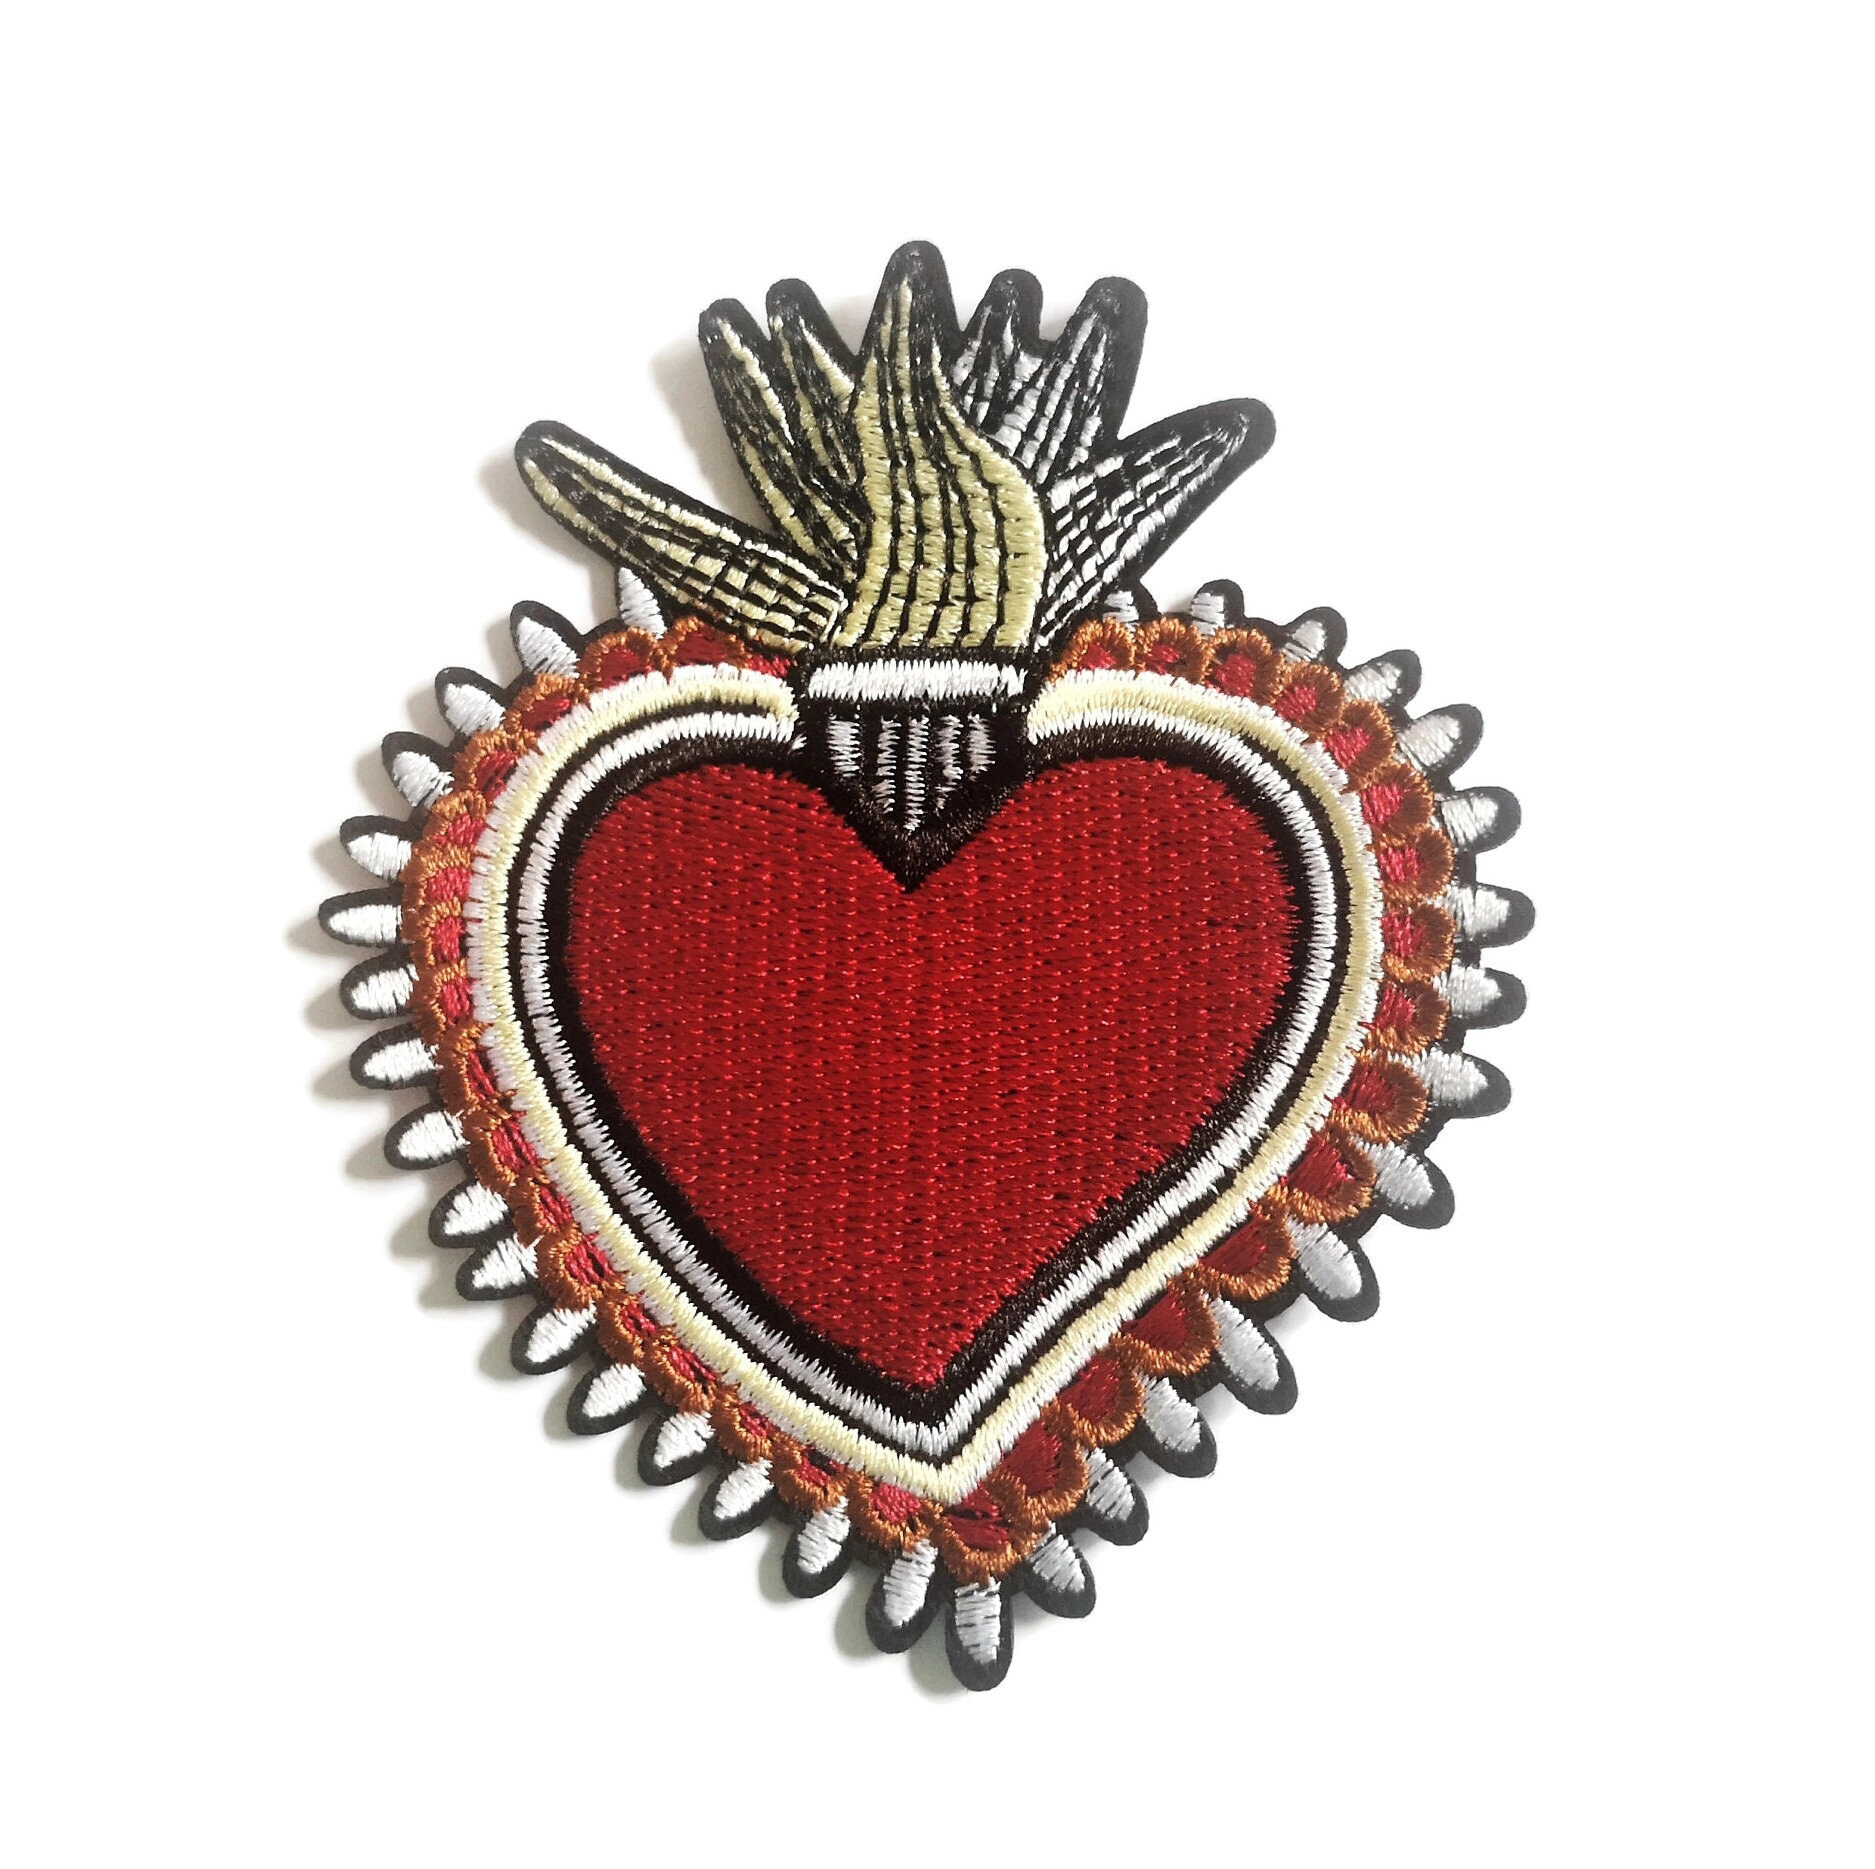 Mexico Heart Flag Patch Country Raza Chicano Embroidered Iron On